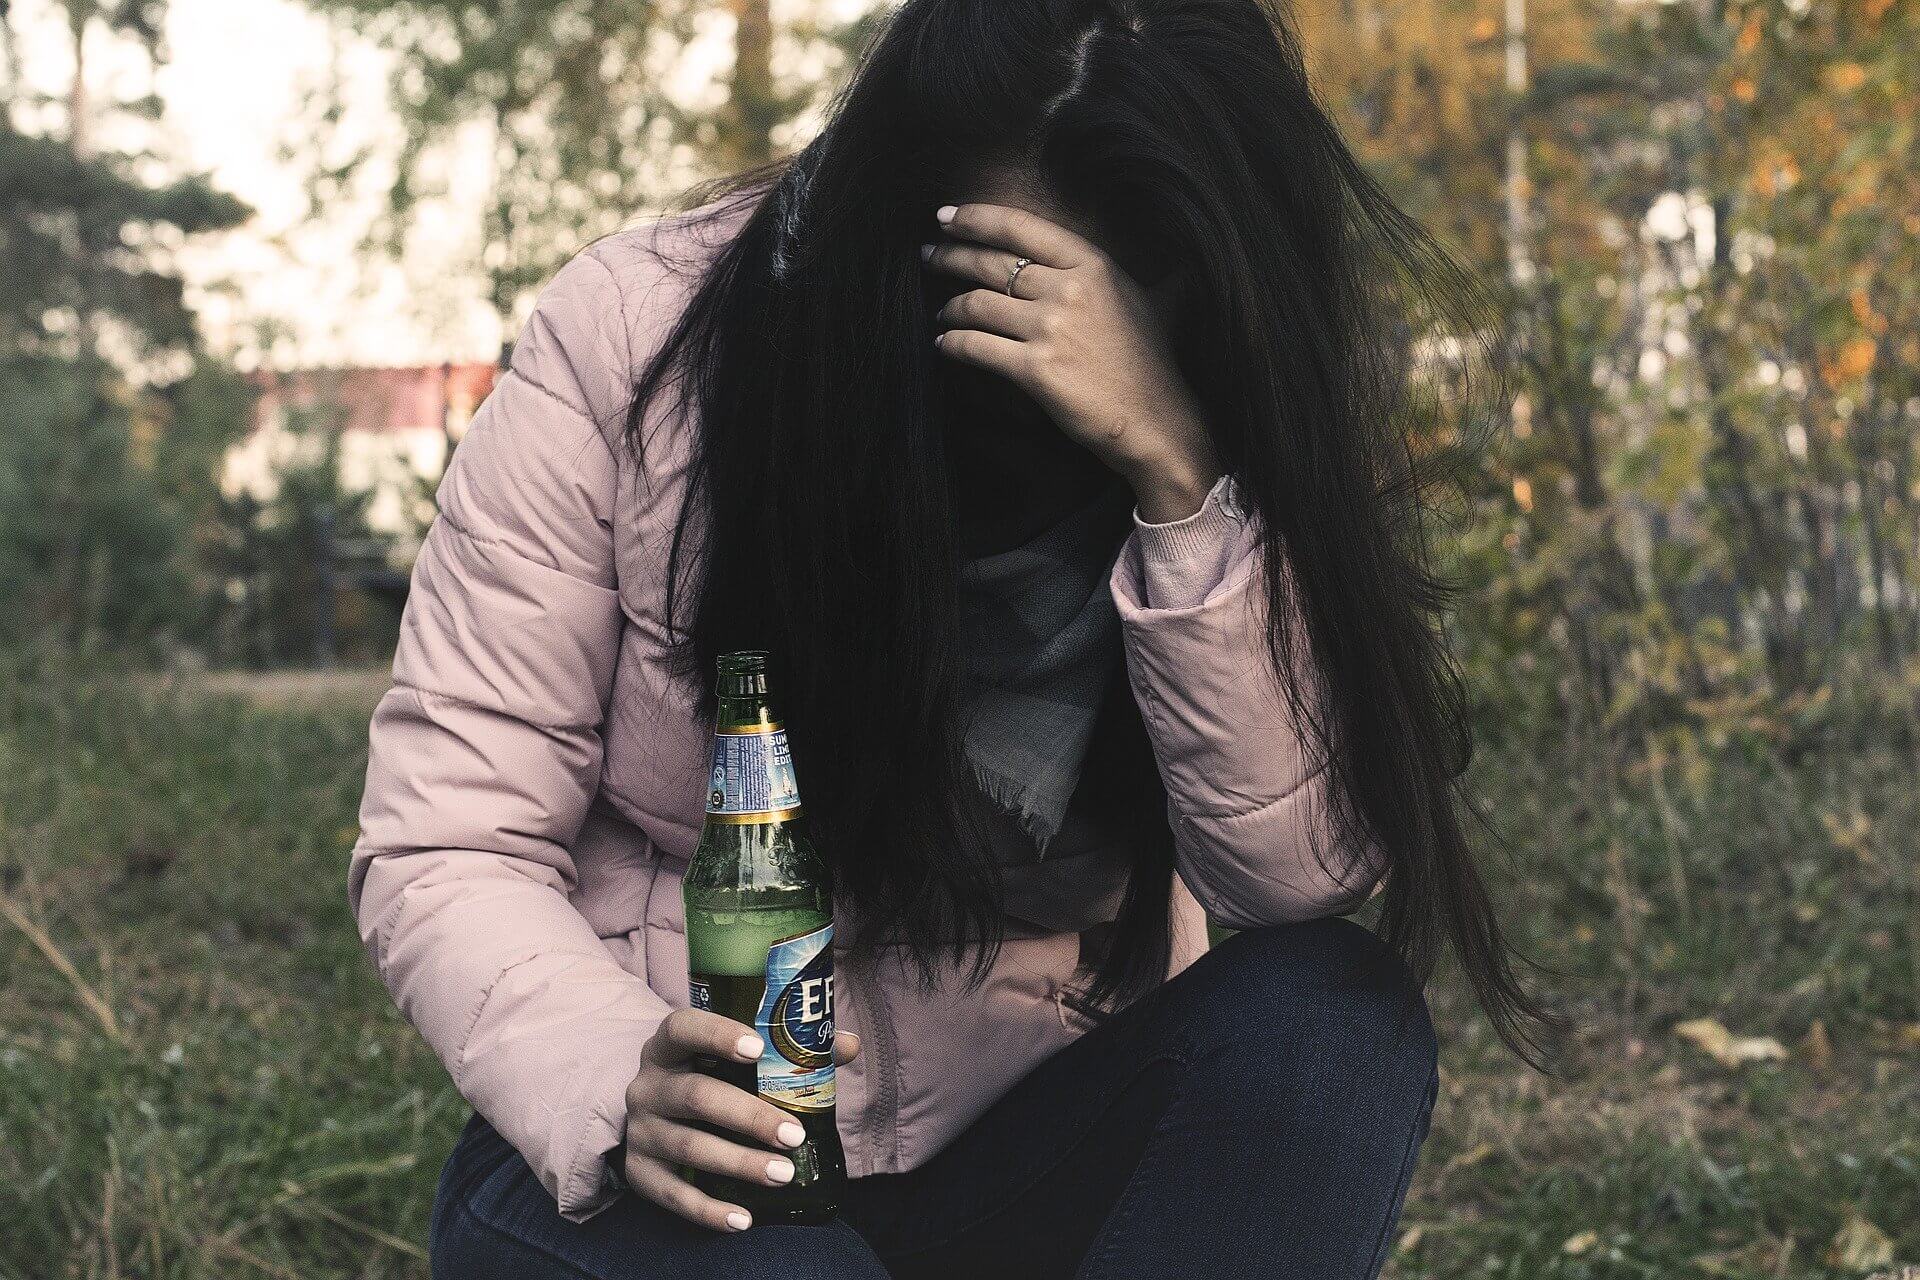 Link Between Alcohol Abuse and Depression